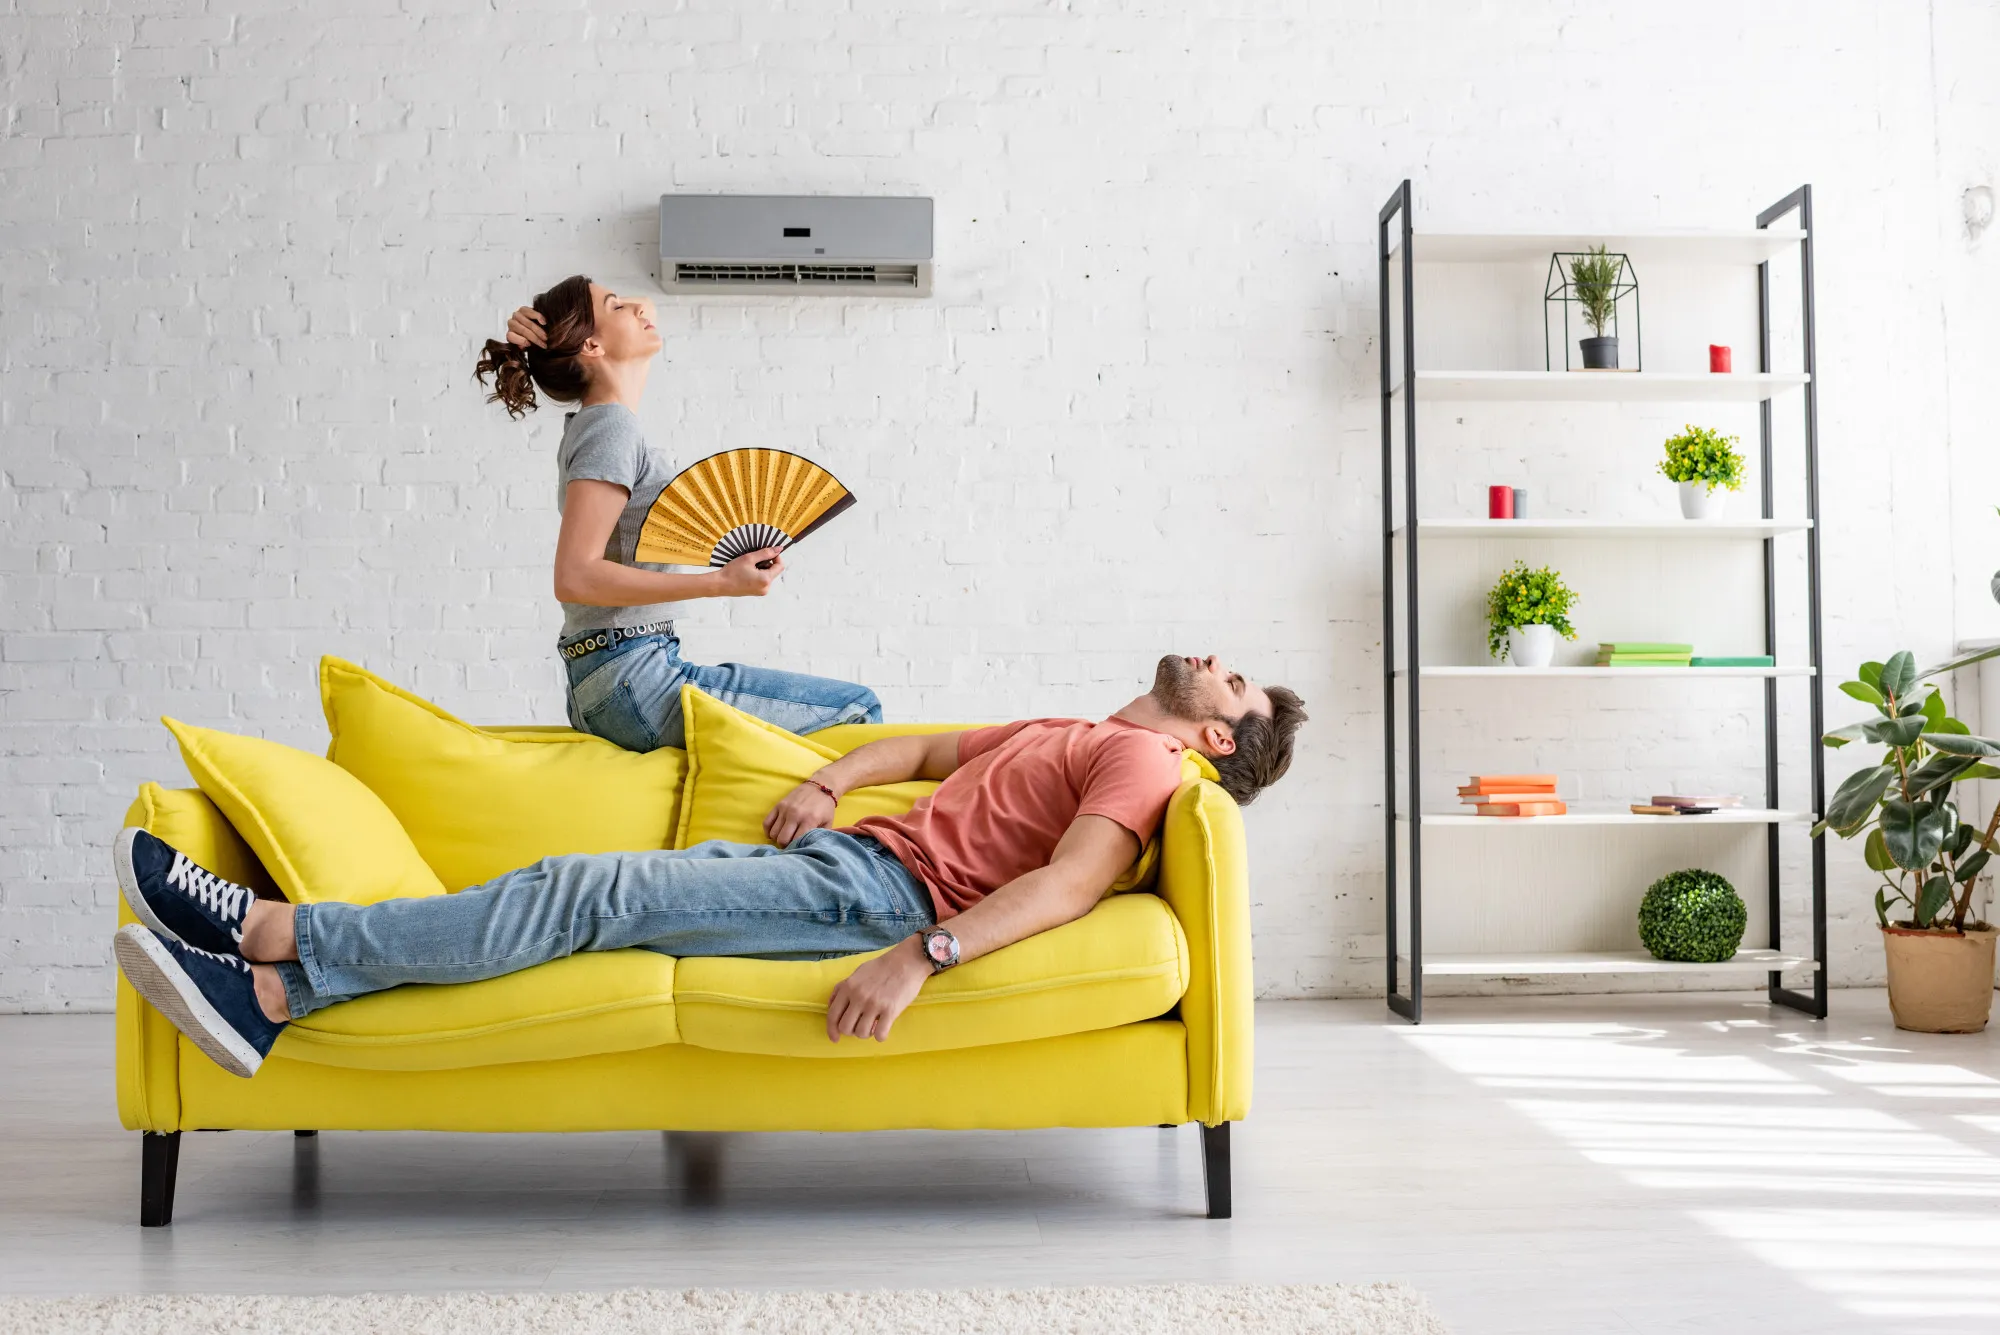 Home Air Conditioner Maintenance To Prepare For The Summer